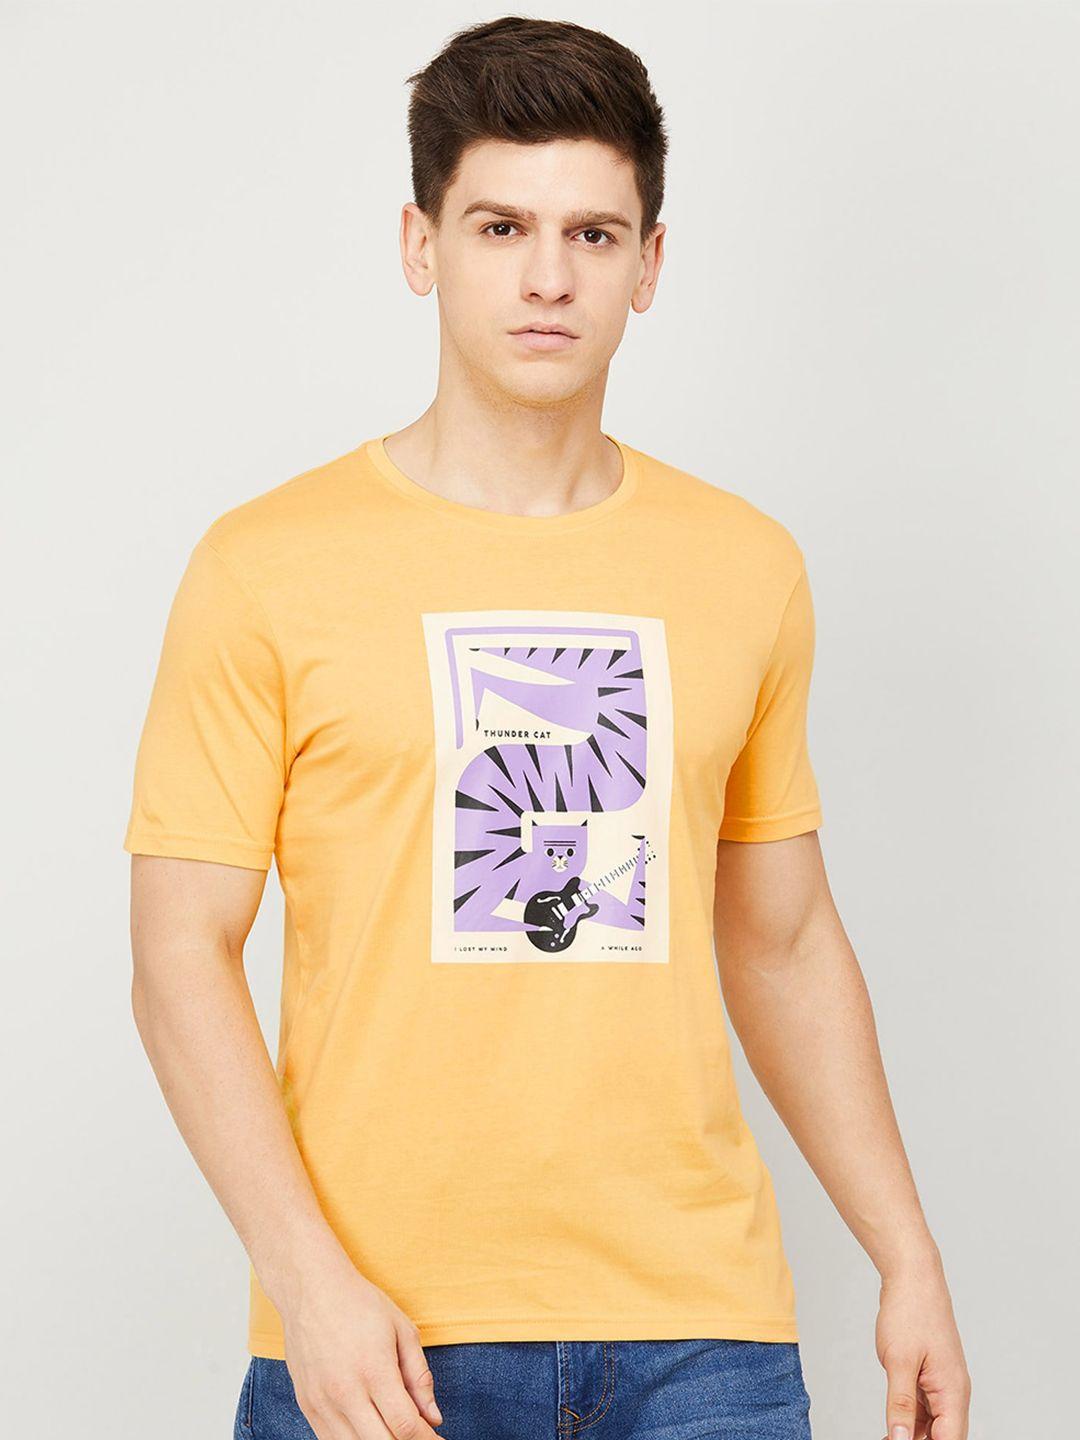 fame forever by lifestyle graphic printed cotton t-shirt